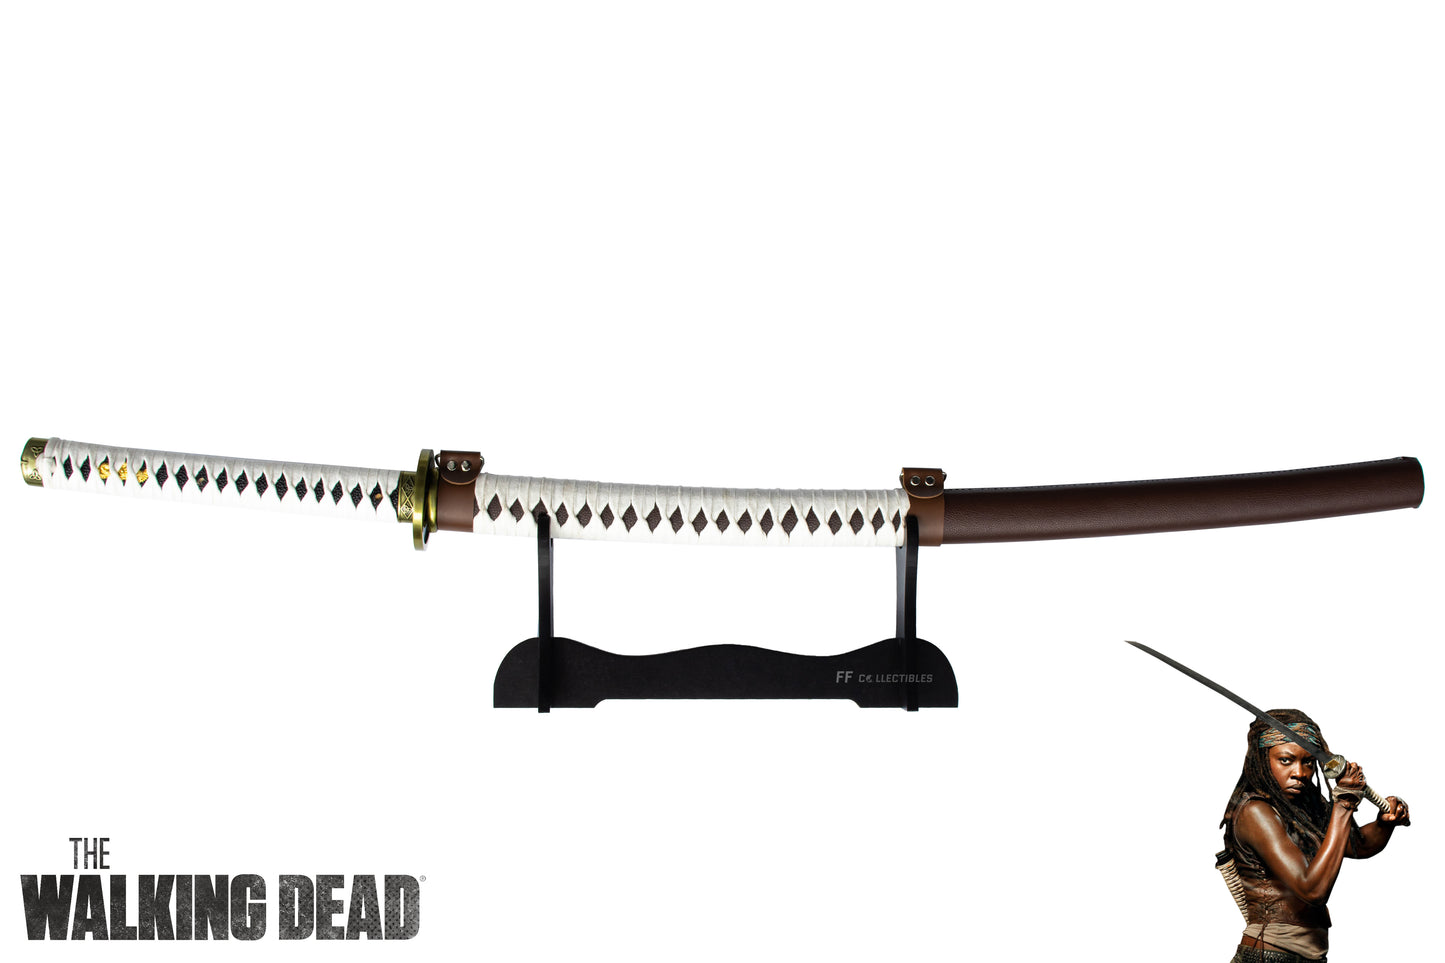 THE WALKING DEAD - MICHONNE'S KATANA (with FREE sword stand and LEATHER STRAP)